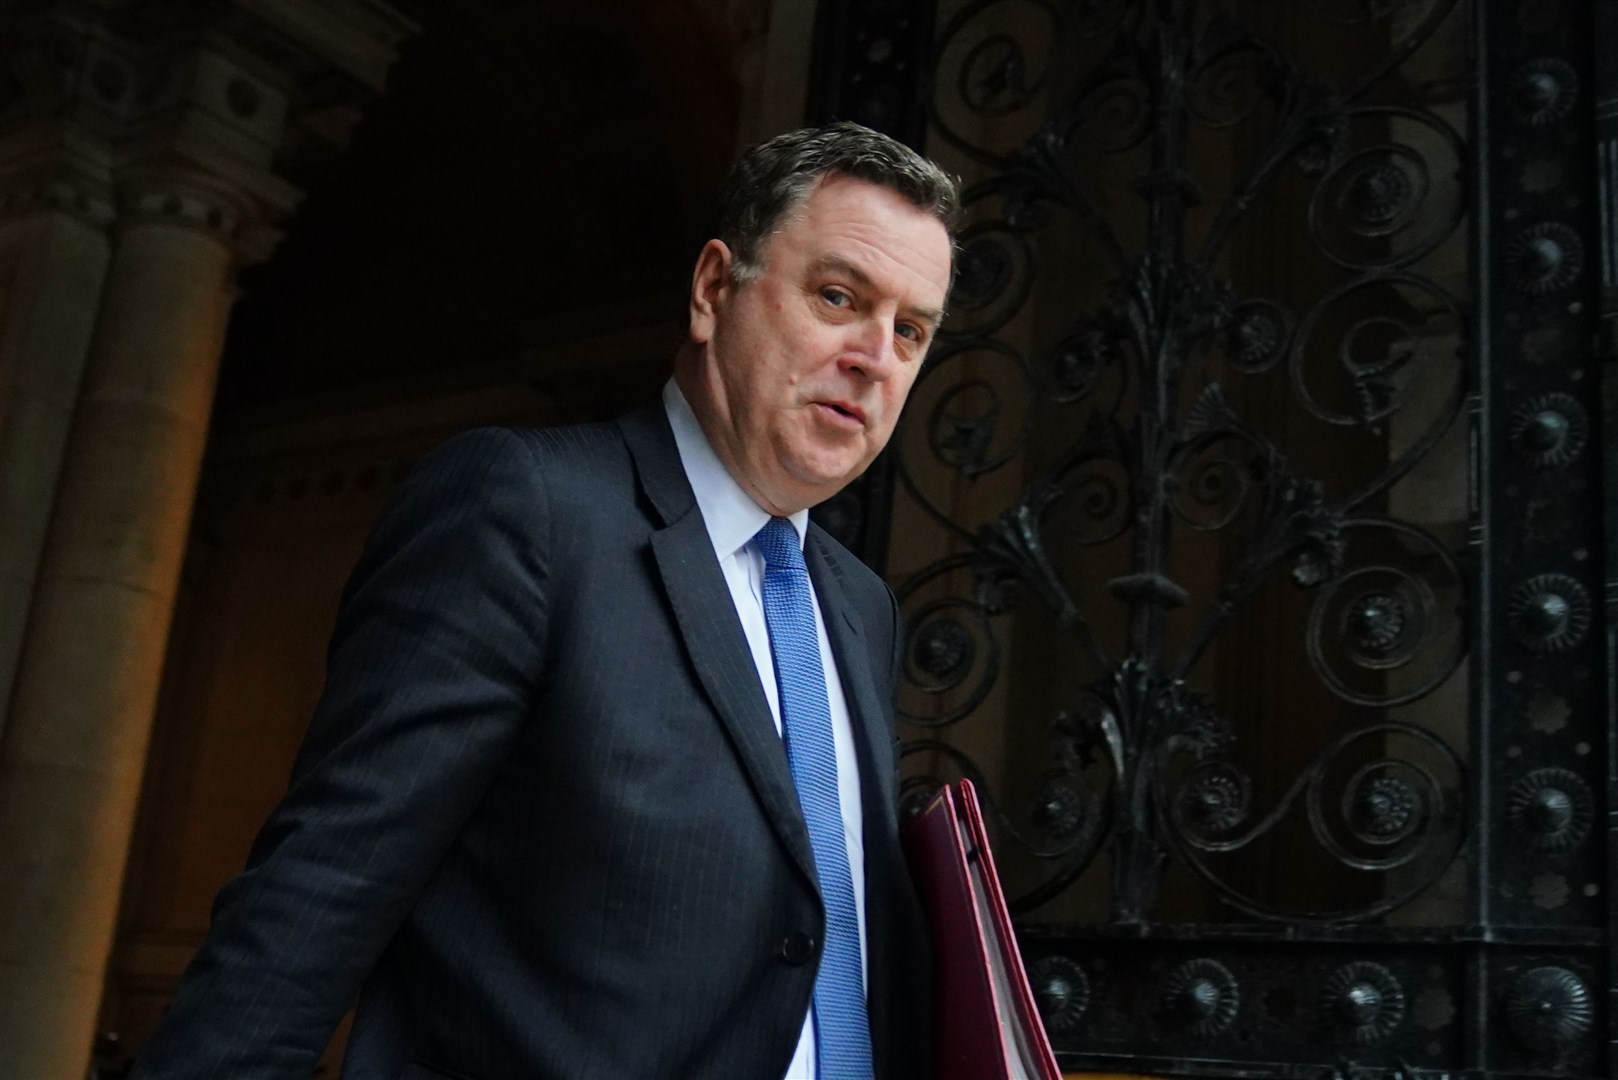 The Government will continue to engage fully and constructively with Parliament, Work and Pensions Secretary Mel Stride said (Victoria Jones/PA)